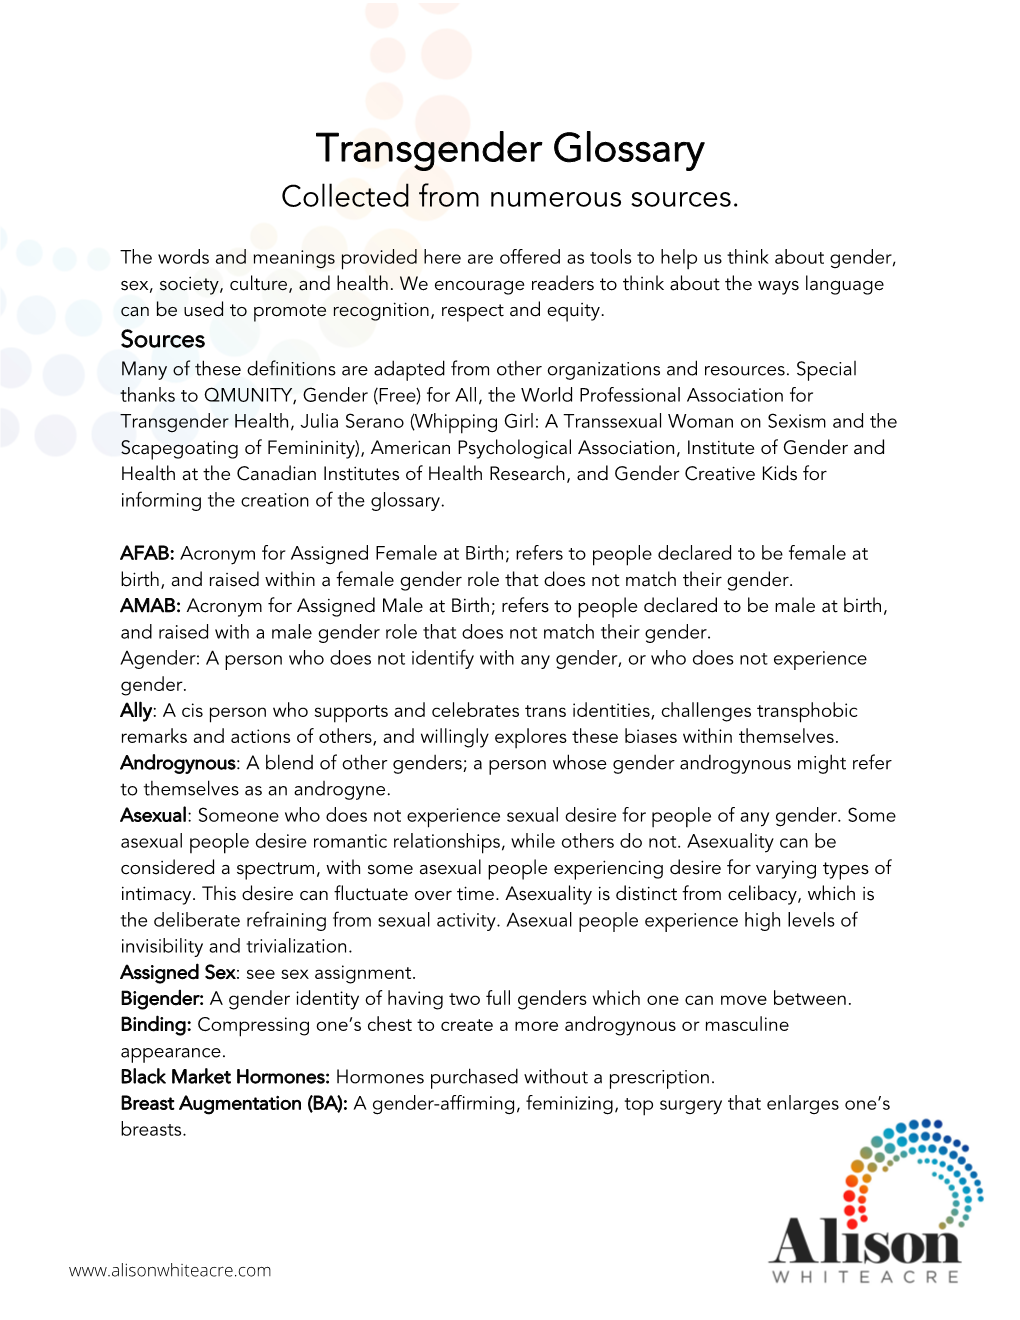 Transgender Glossary Collected from Numerous Sources